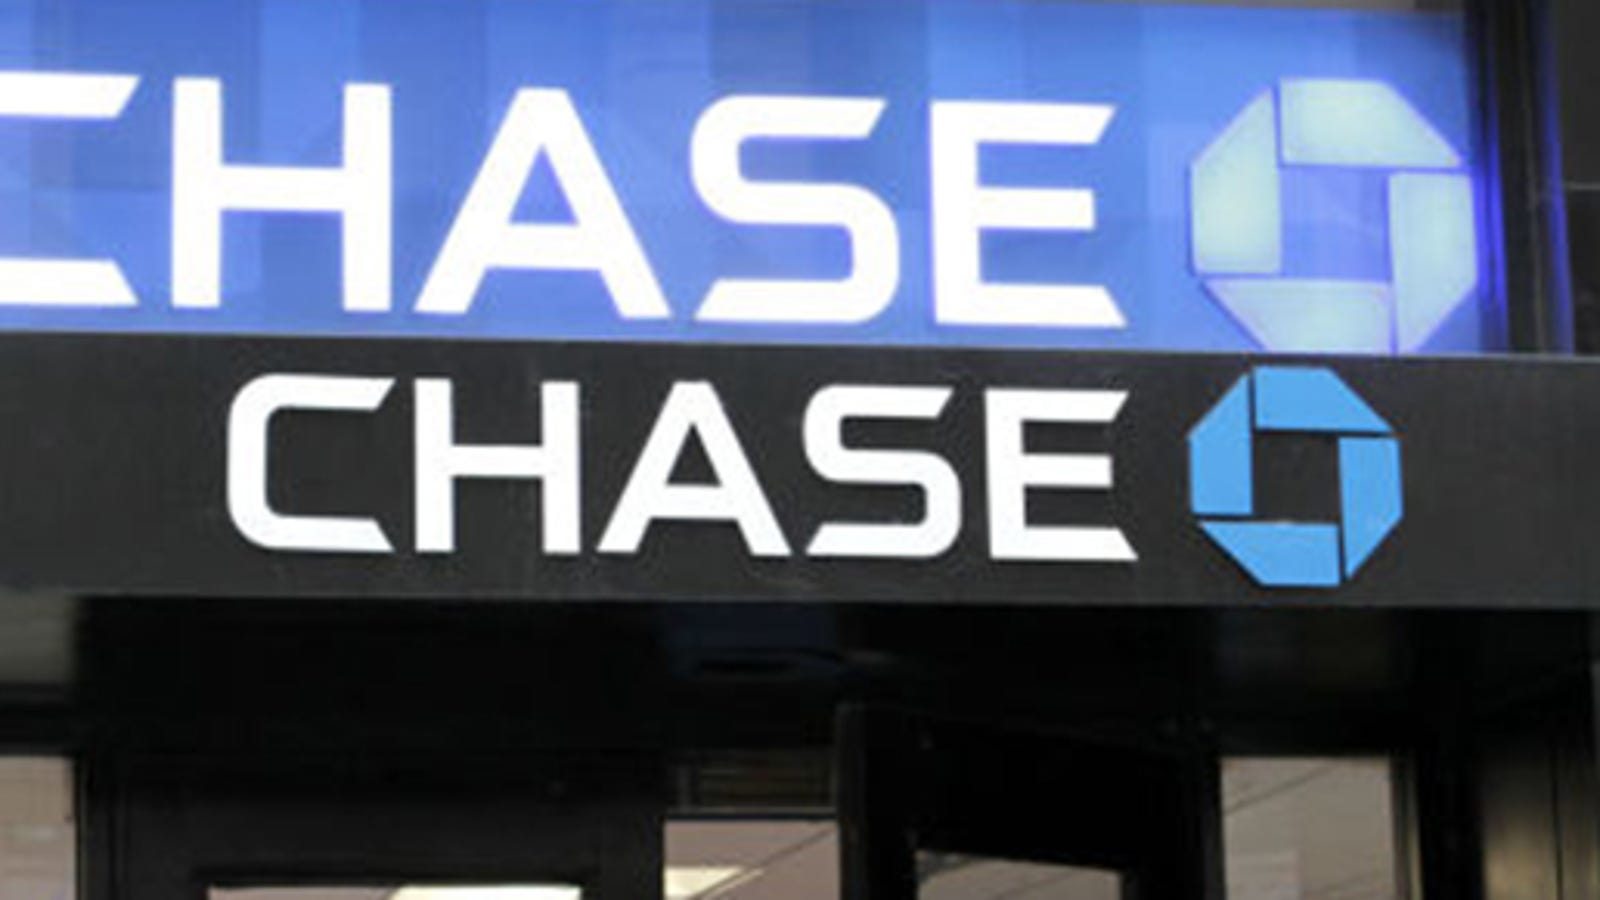 Report 76 Million Households Affected by Chase Data Breach